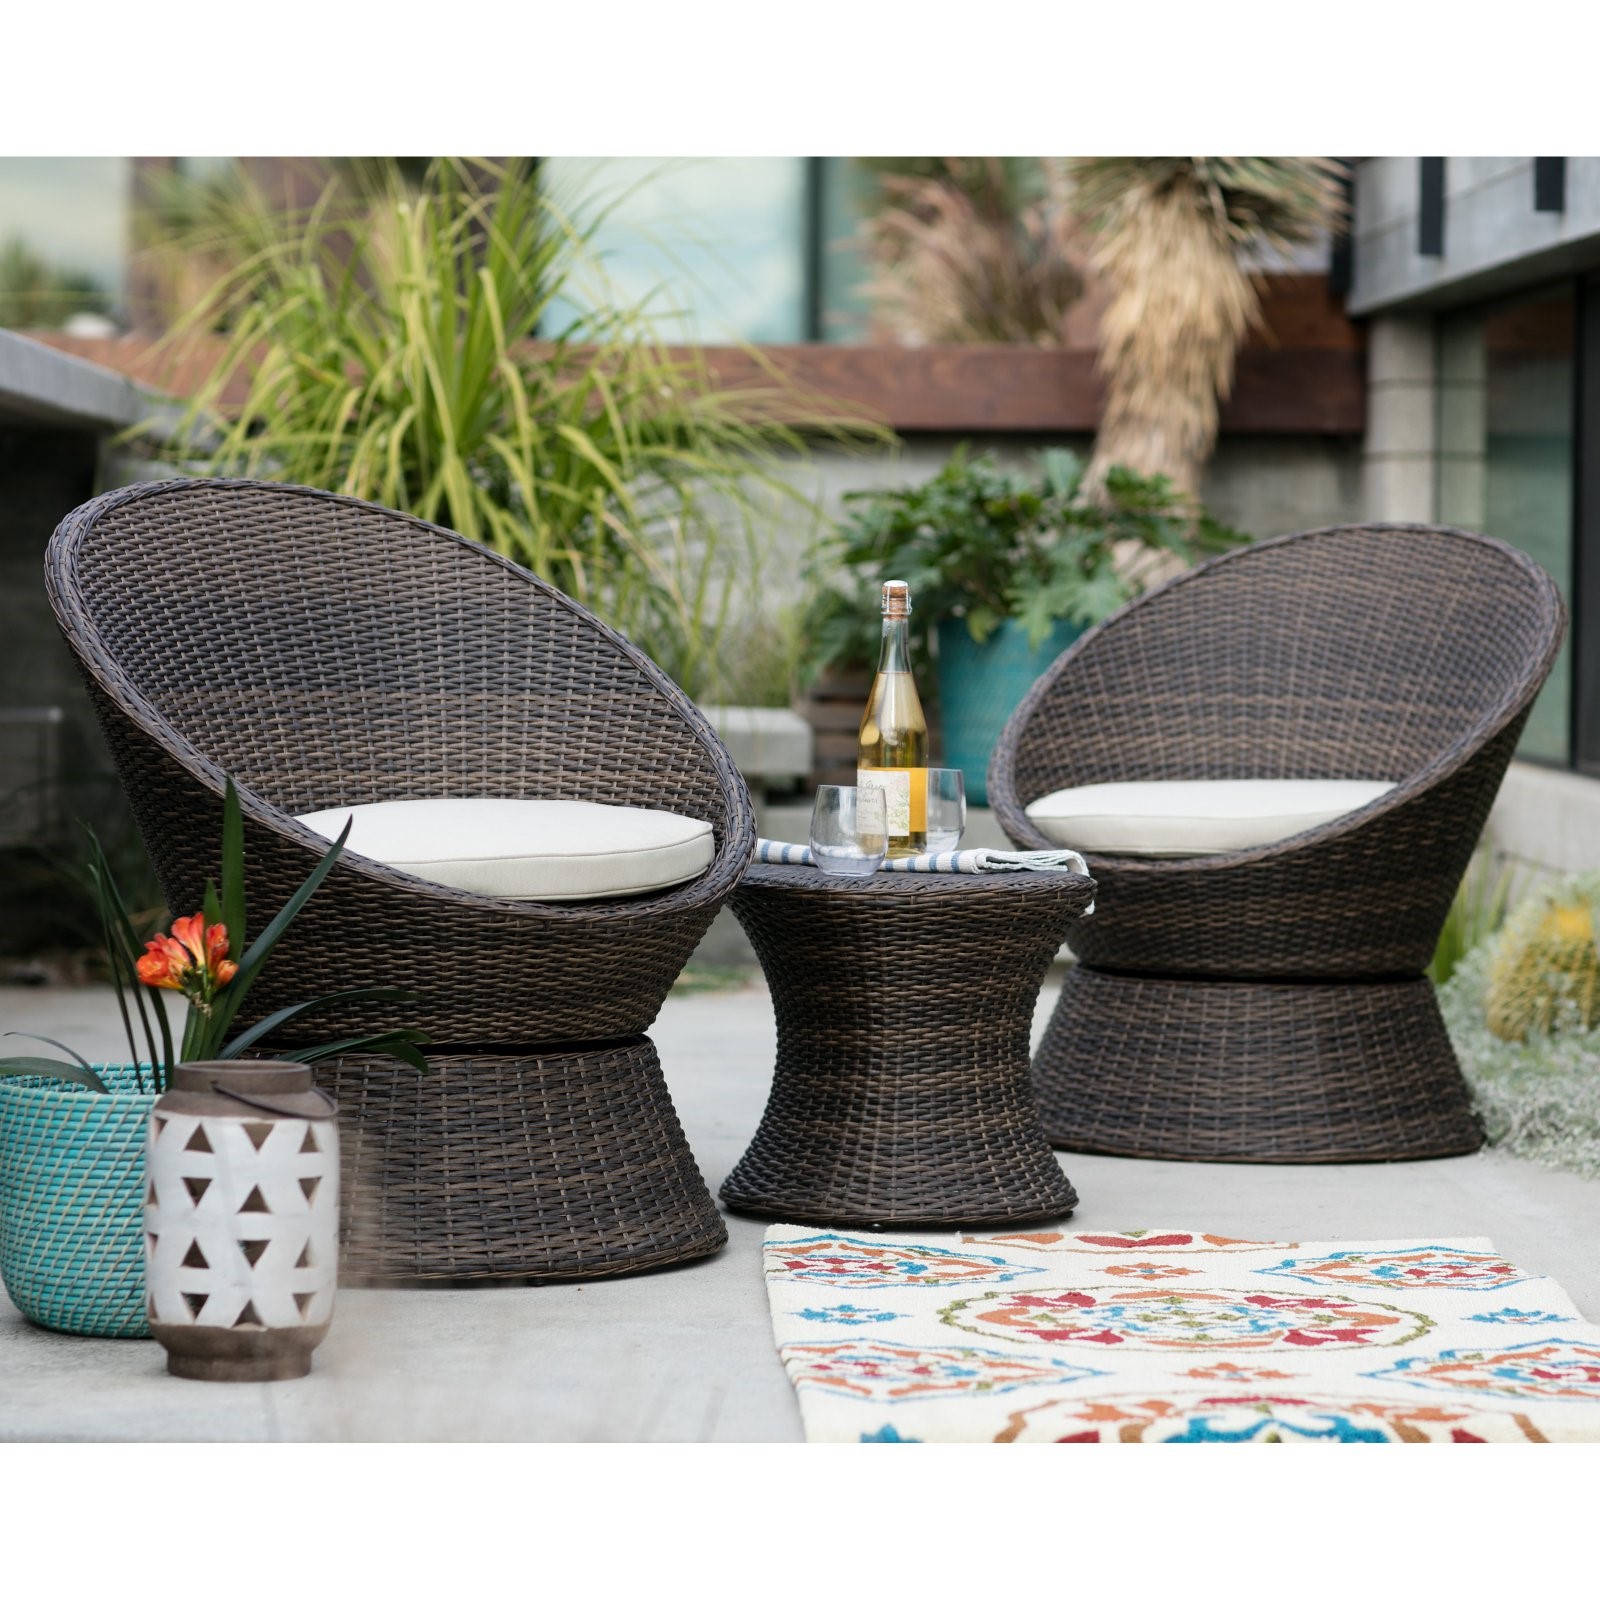 coral coast laynee all weather wicker piece patio swivel chairs outdoor side table and homesense armchair brass glass end ott storage box ikea round oak coffee cherry small weber